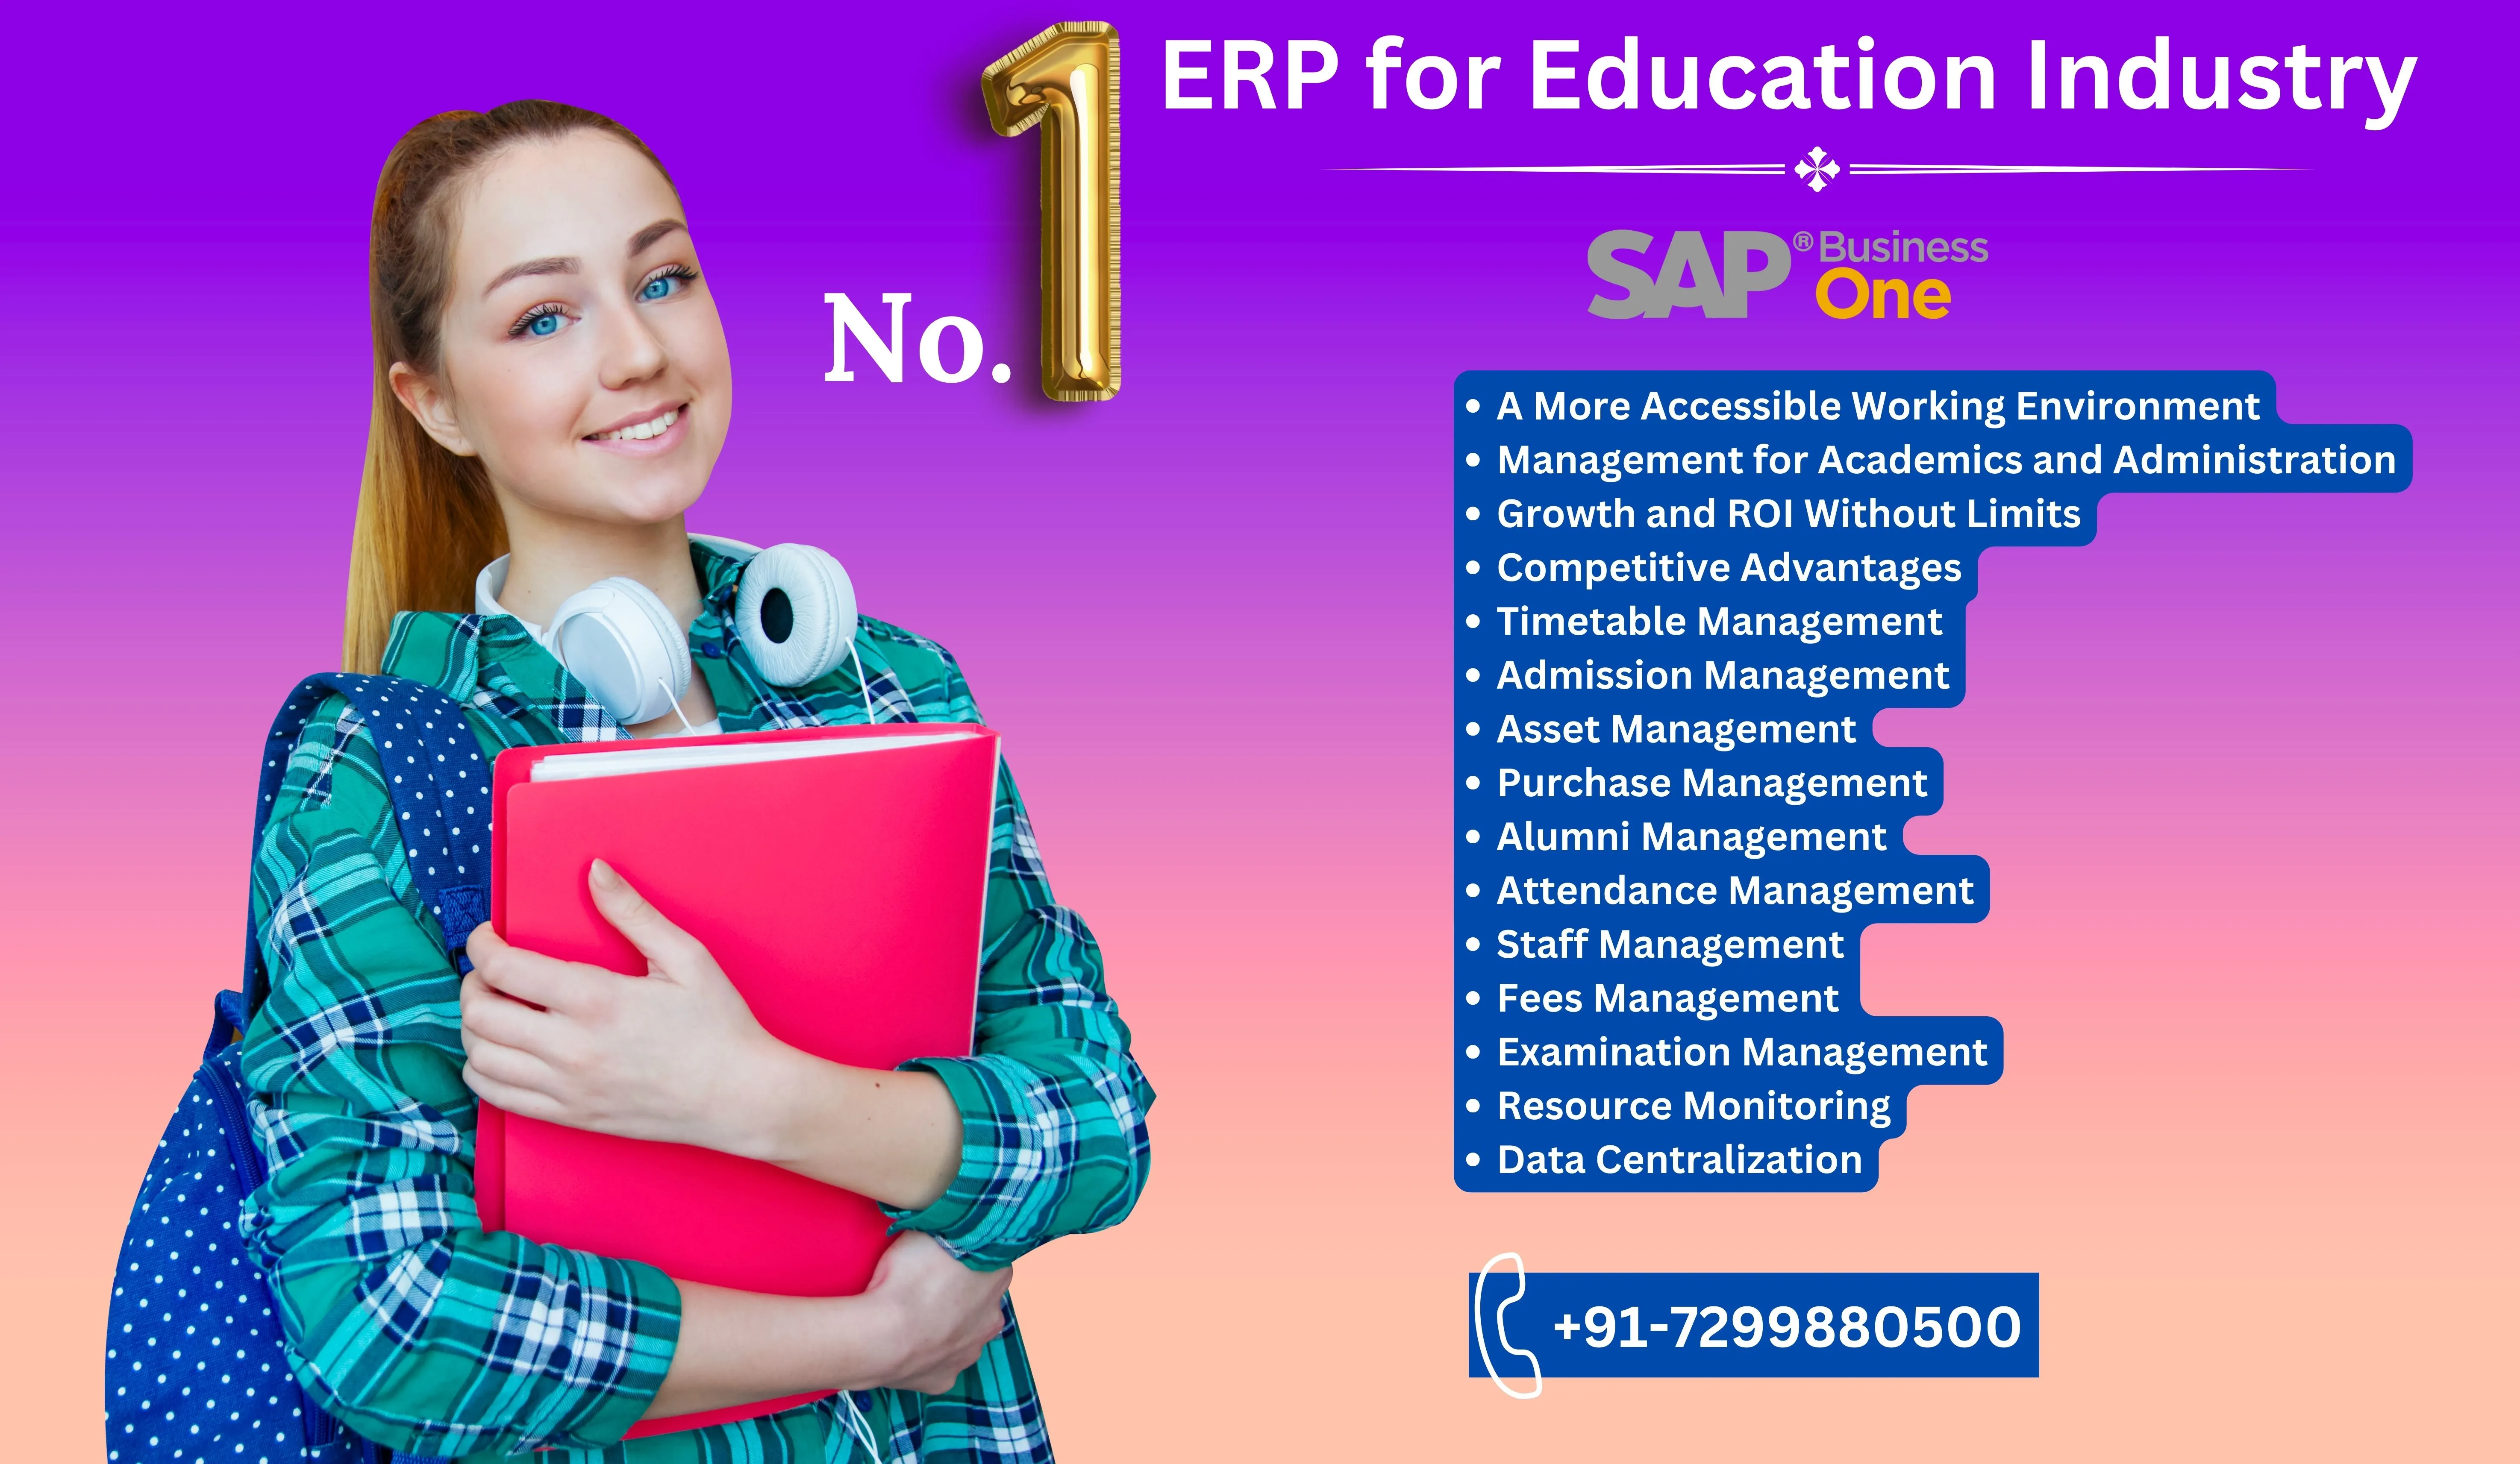 SAP business One ERP in Education Industry